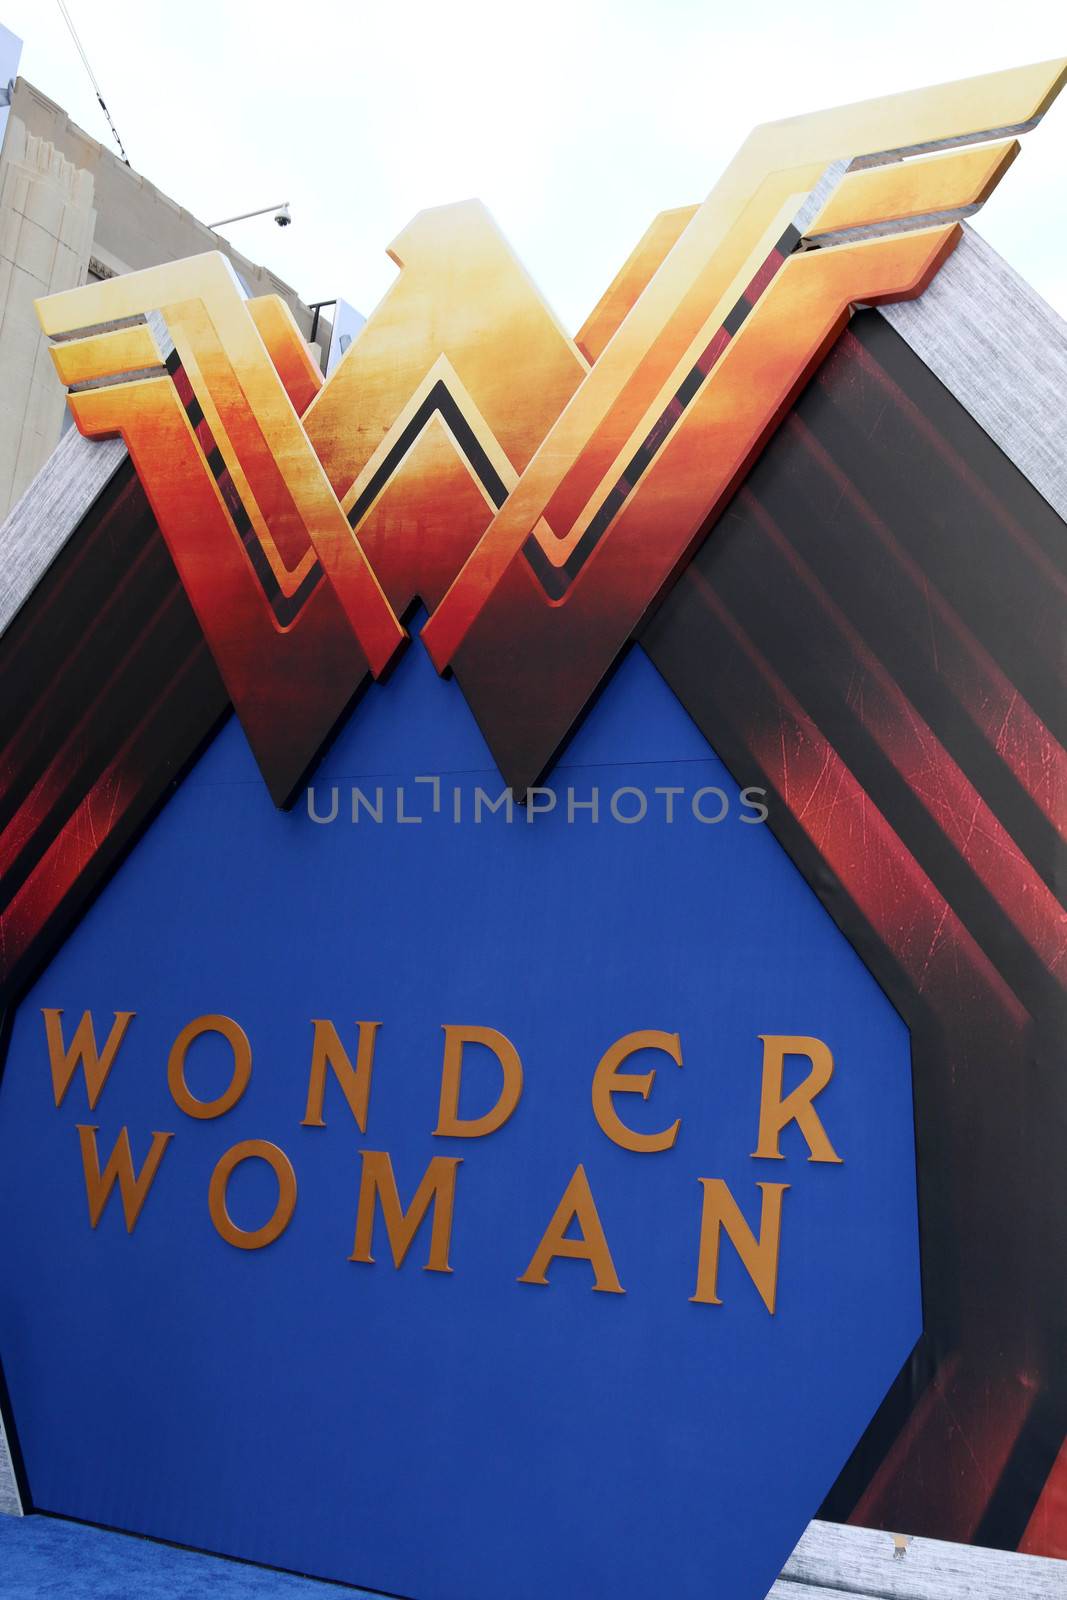 Wonder Woman Atmosphere
at the "Wonder Woman" Premiere, Pantages, Hollywood, CA 05-25-17/ImageCollect by ImageCollect